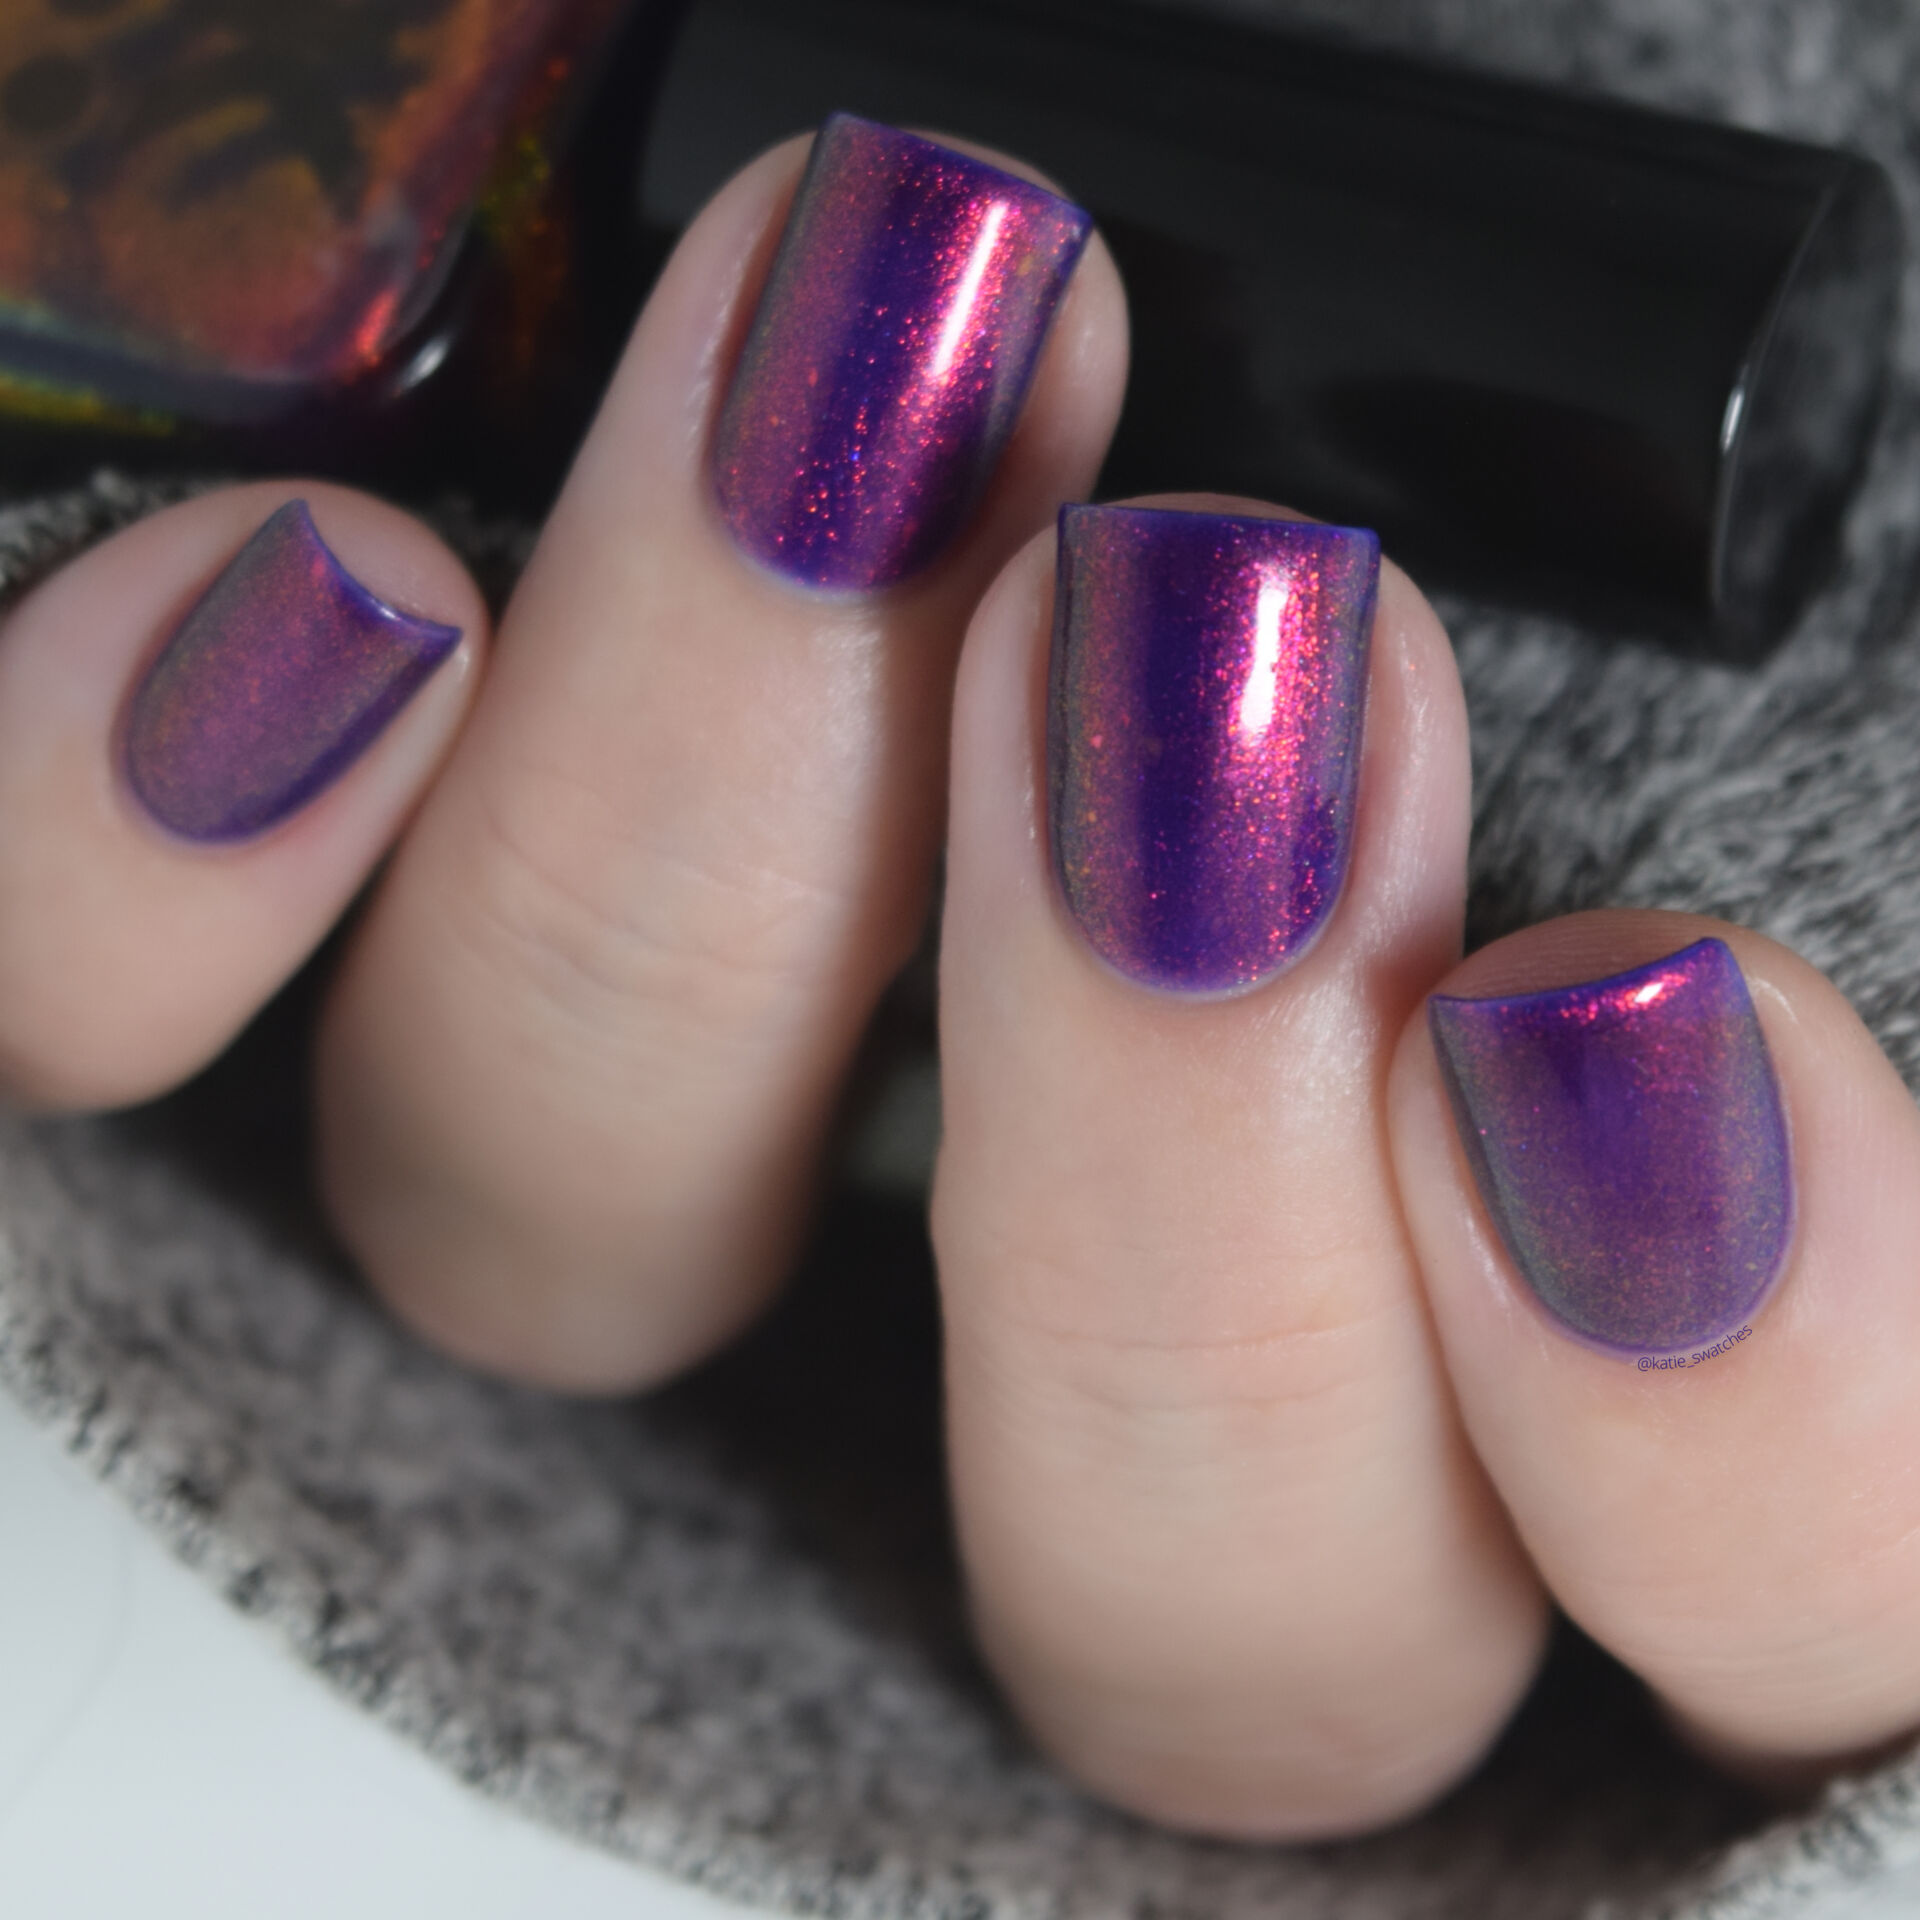 DRK Nails - Purifire nail polish swatch. Violet purple jelly nail polish with aurora shimmer. Polish Pickup August 2021 exclusive